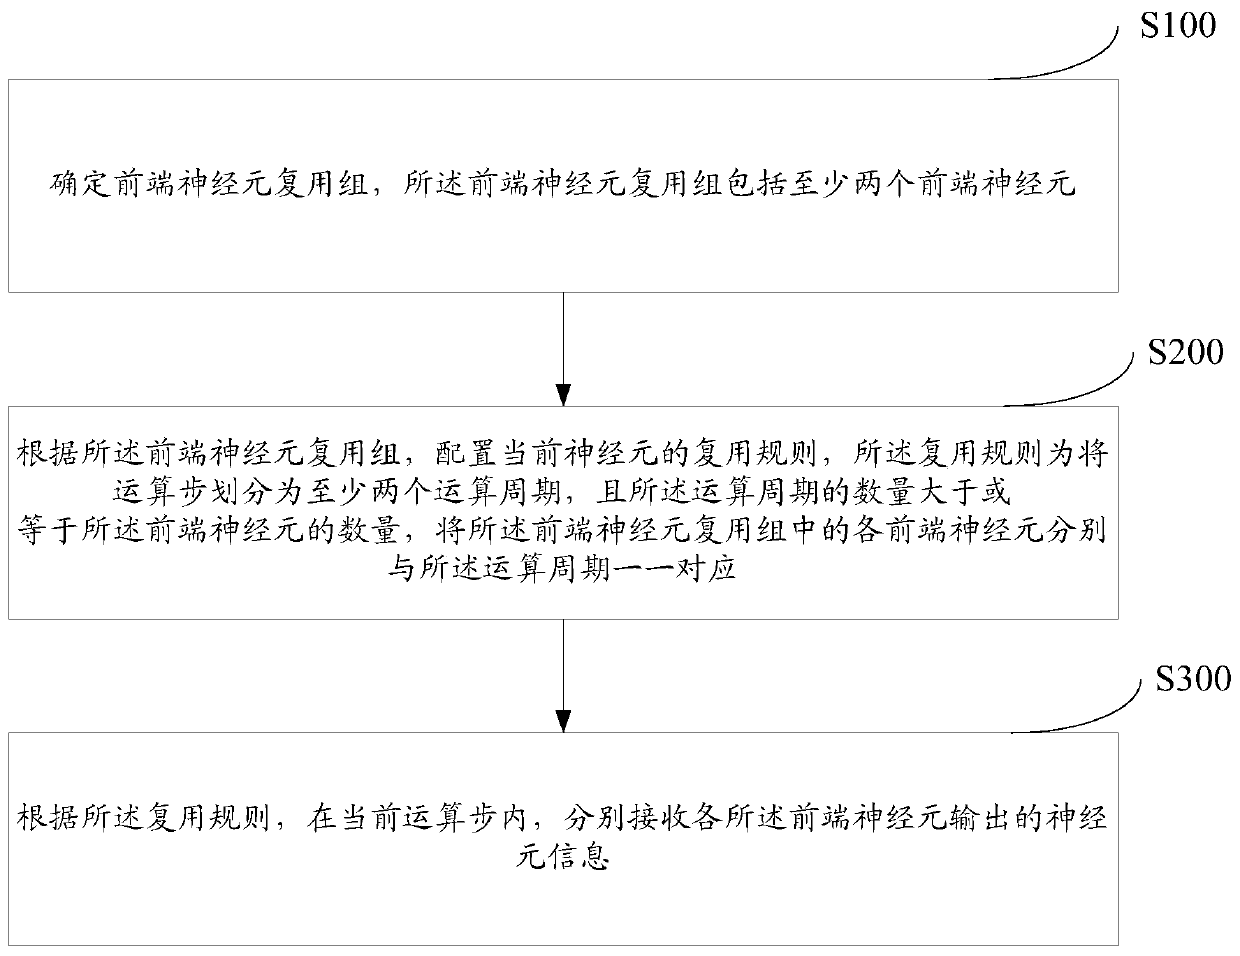 Neuron information receiving method and system